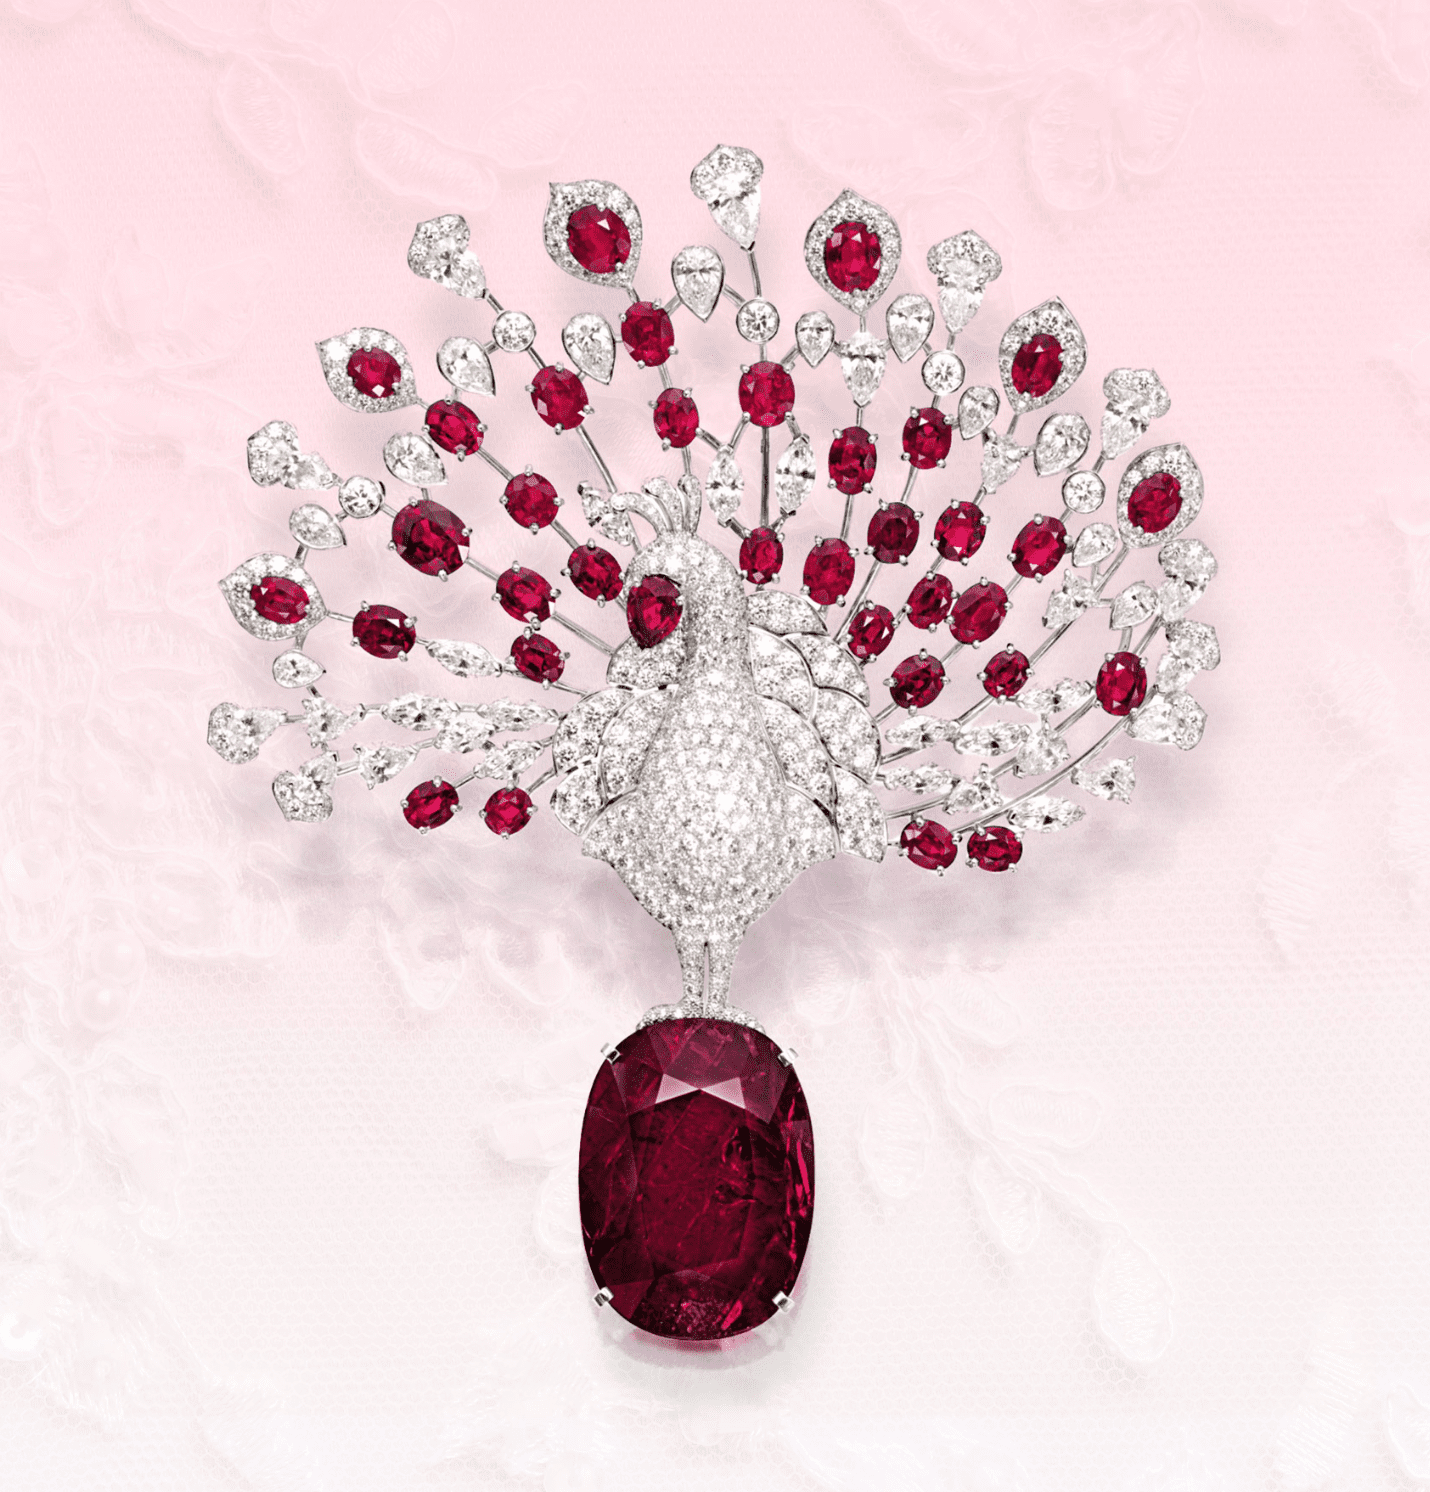 Cartier Peacock brooch with Mozambique rubies